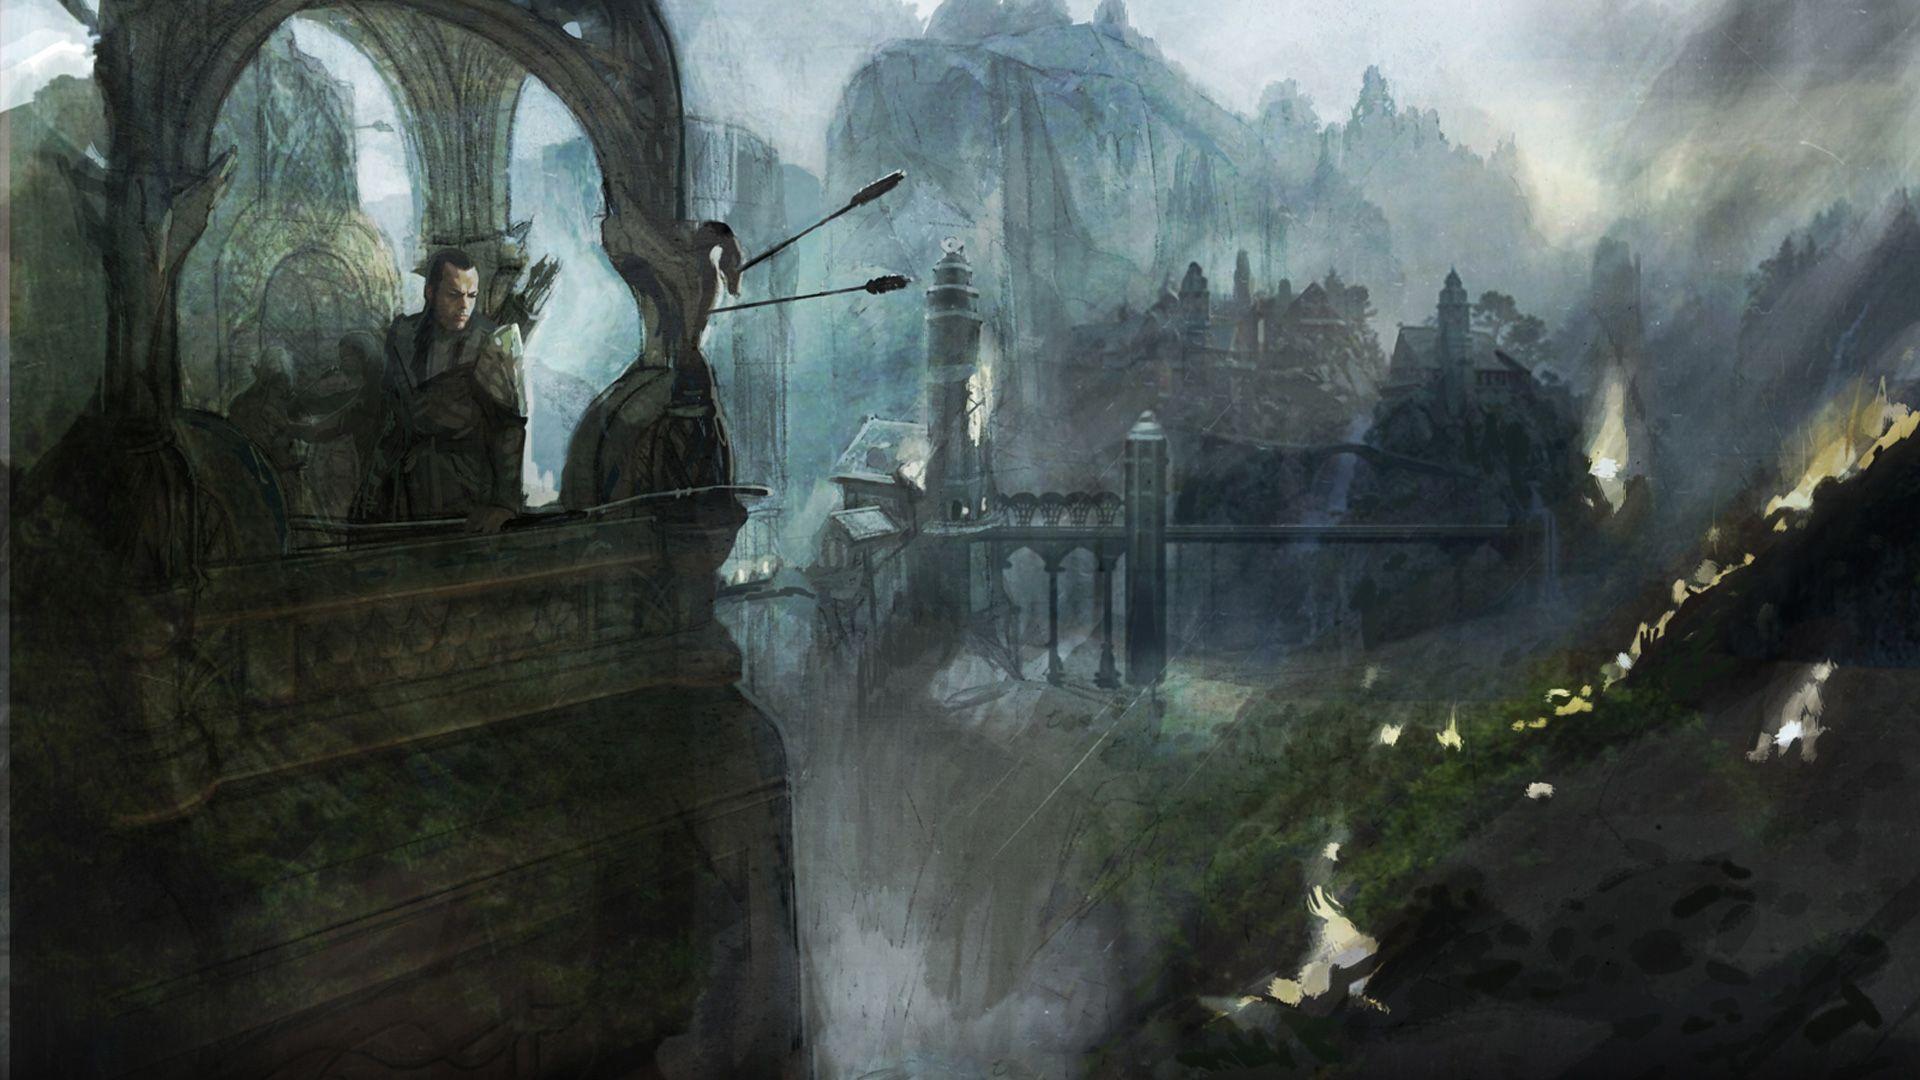 Dreamy & fantasy Wallpaper: Lord Of The Rings Rivendell Wallpaper